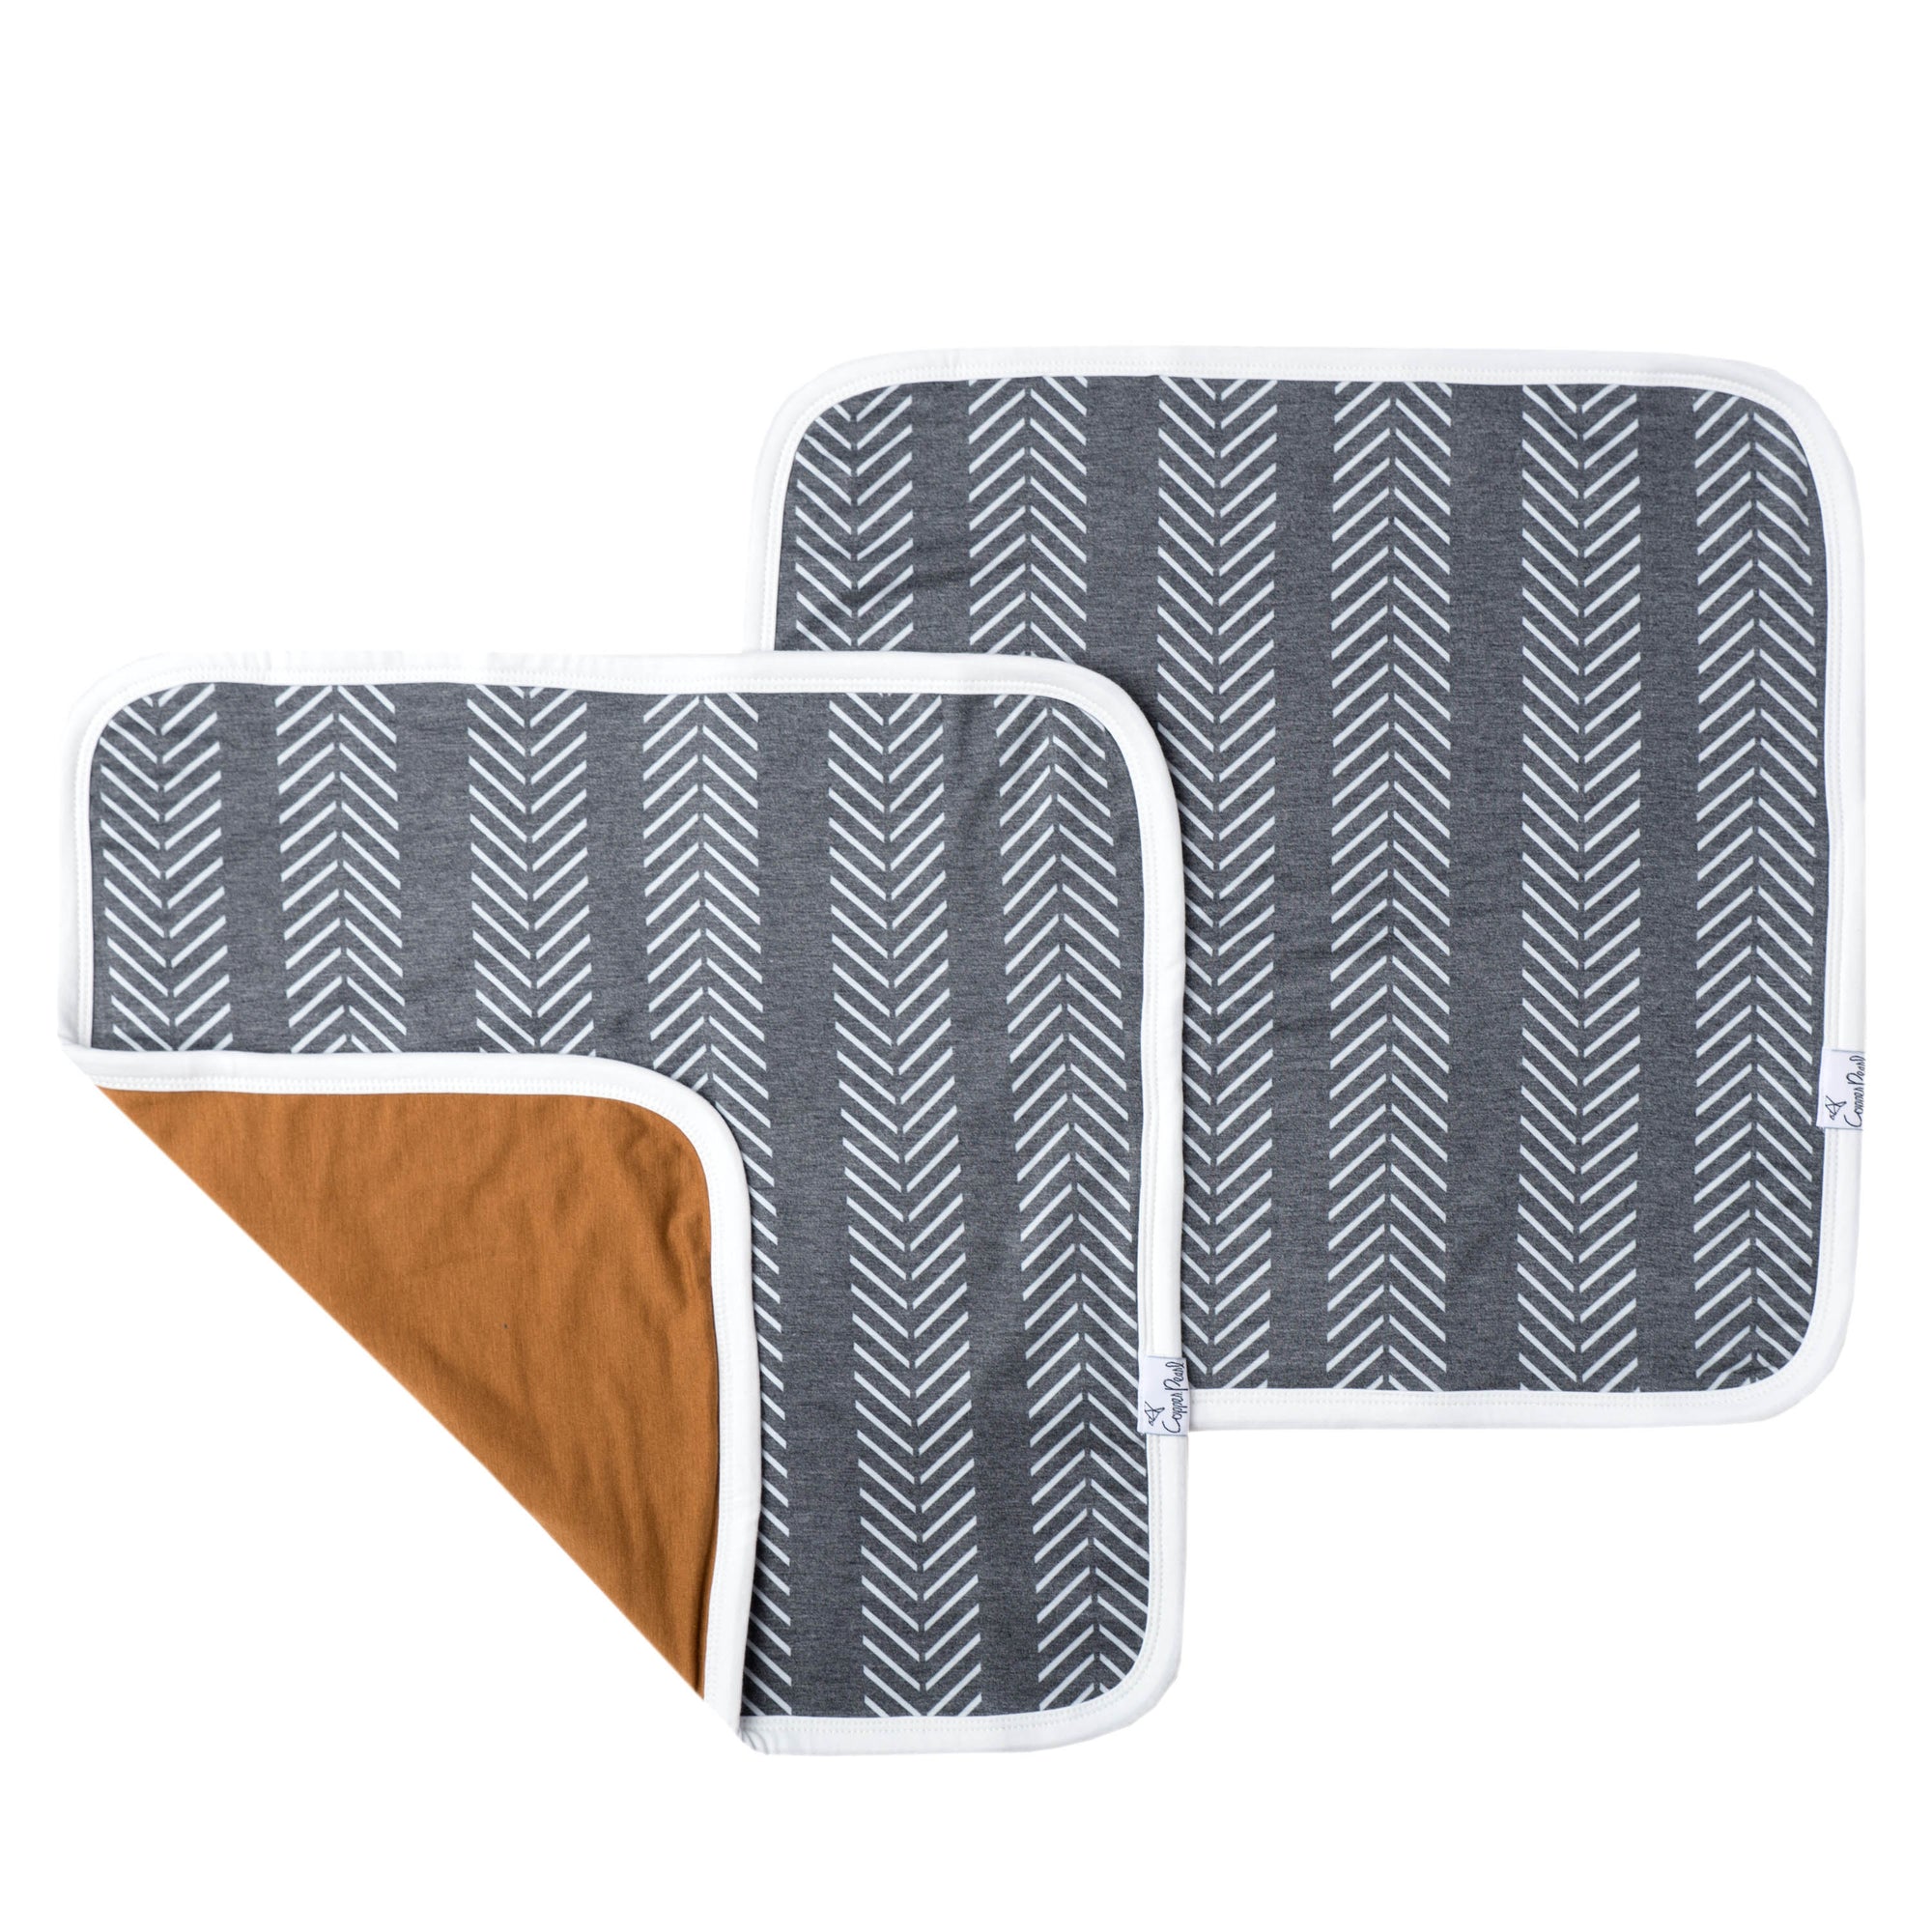 Three-Layer Security Blanket Set - Canyon